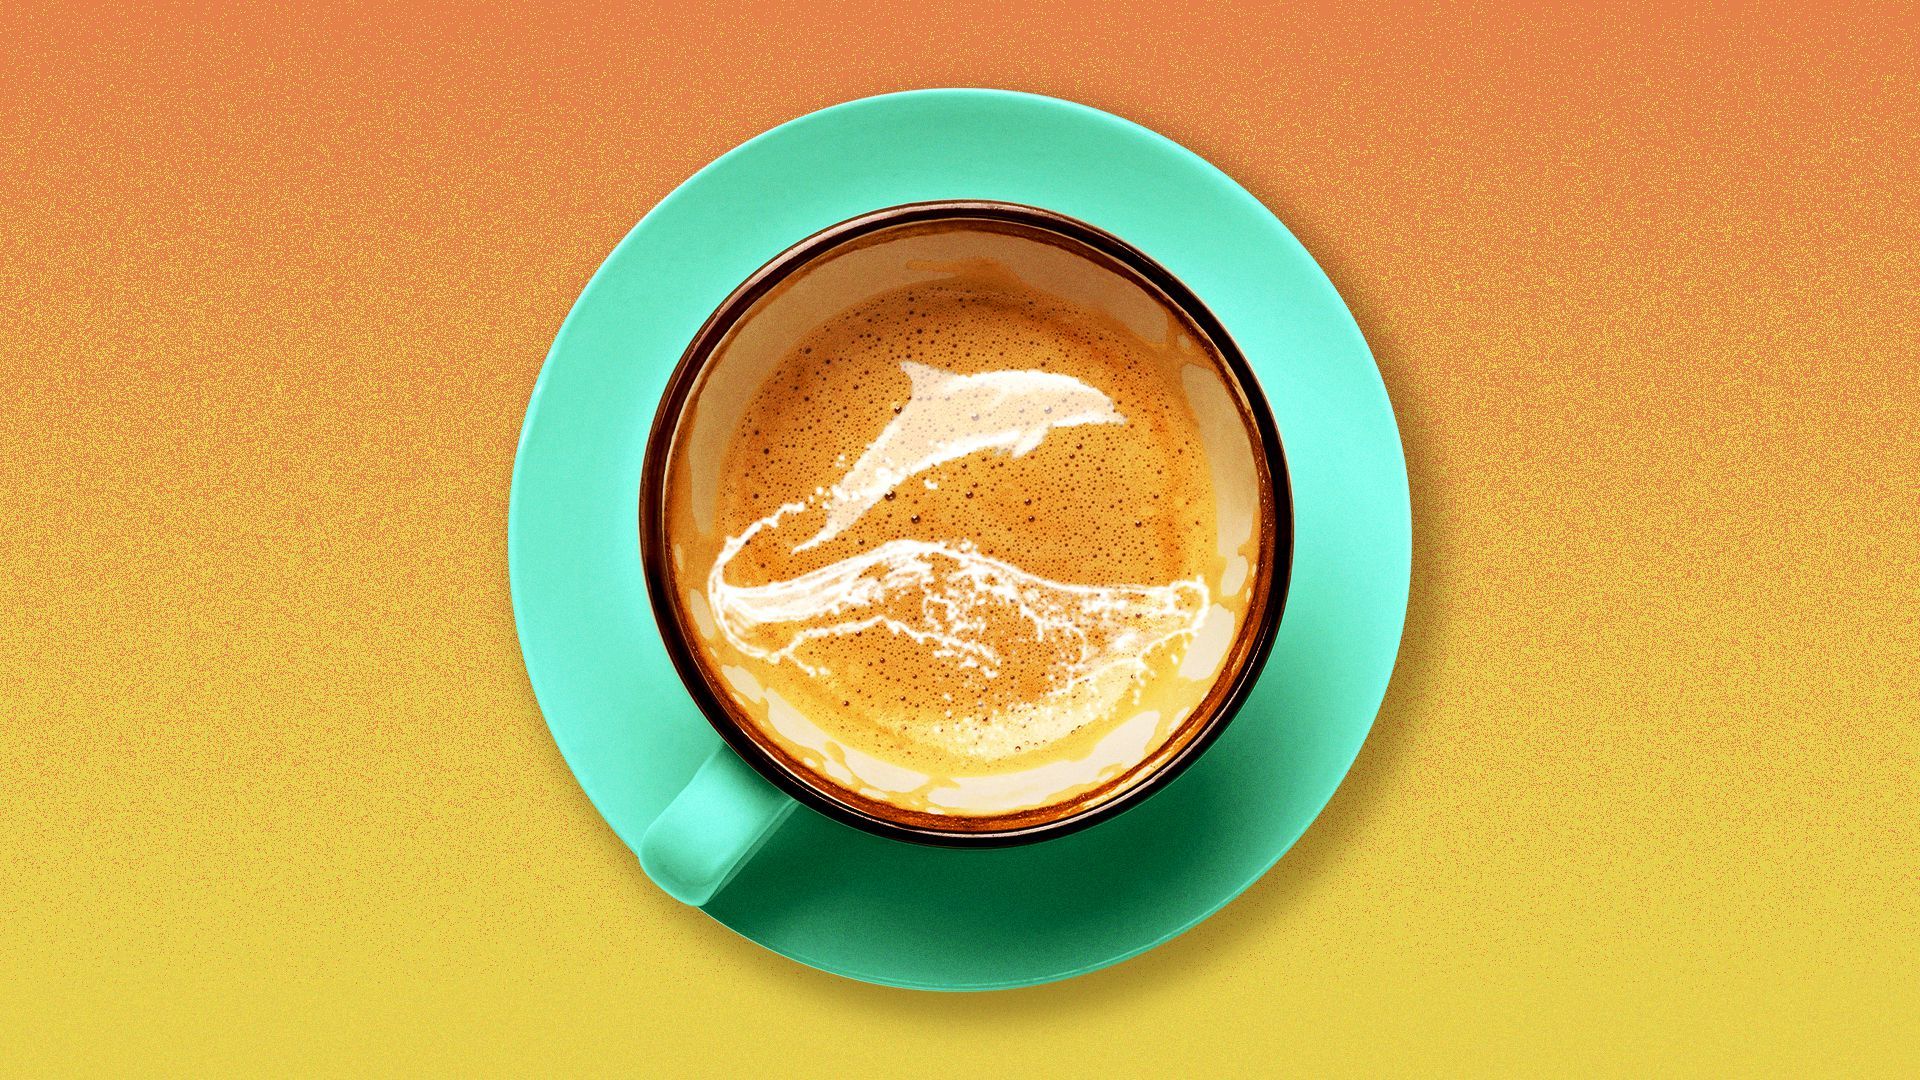 Illustration of a coffee cup with dolphin latte art.